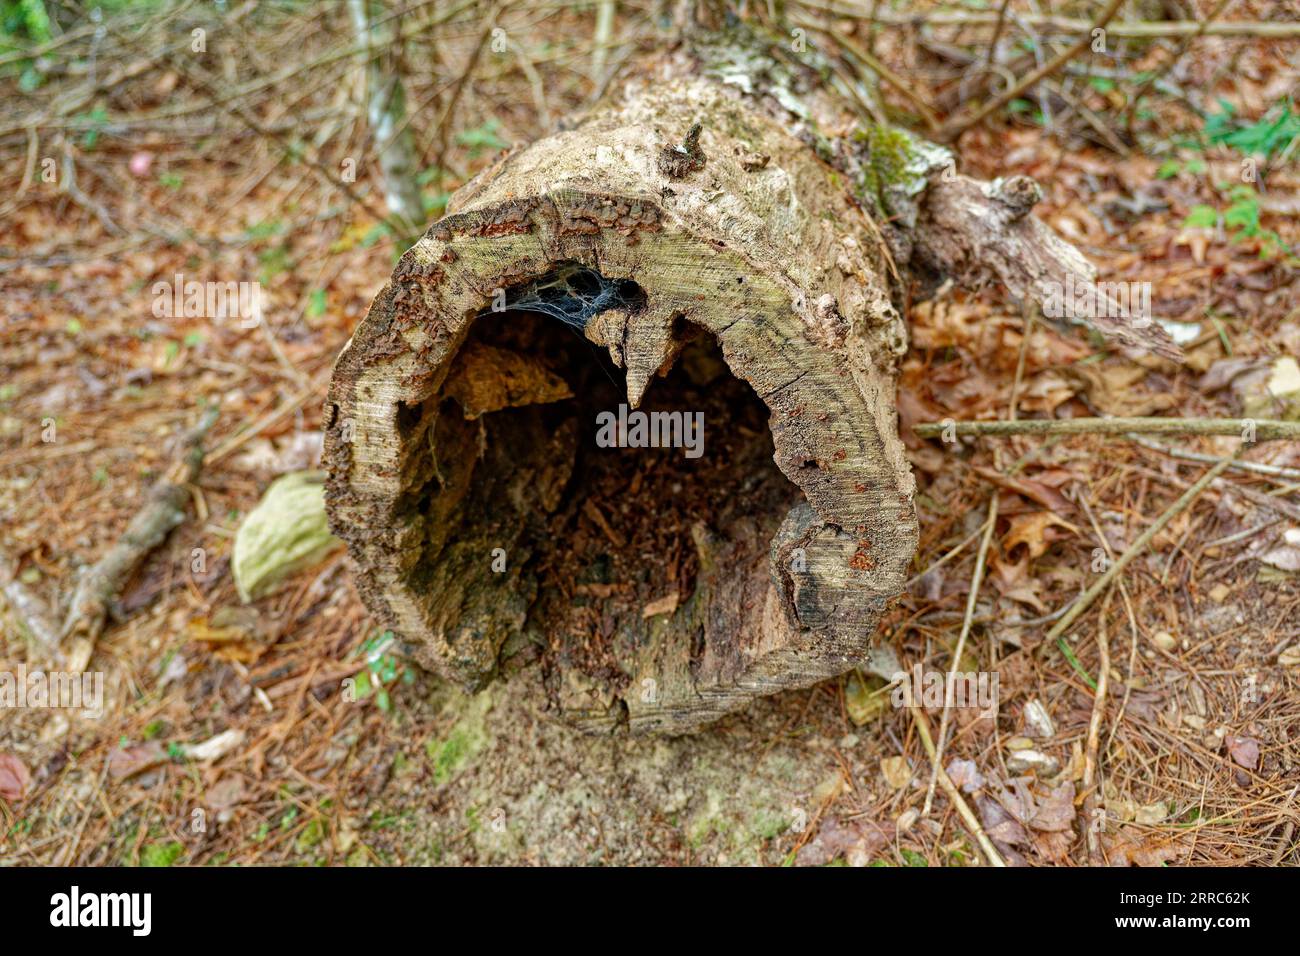 A hollow log laying on the forest floor covered with fungi surrounded by leaves and twigs rotting away on the ground in late summertime Stock Photo